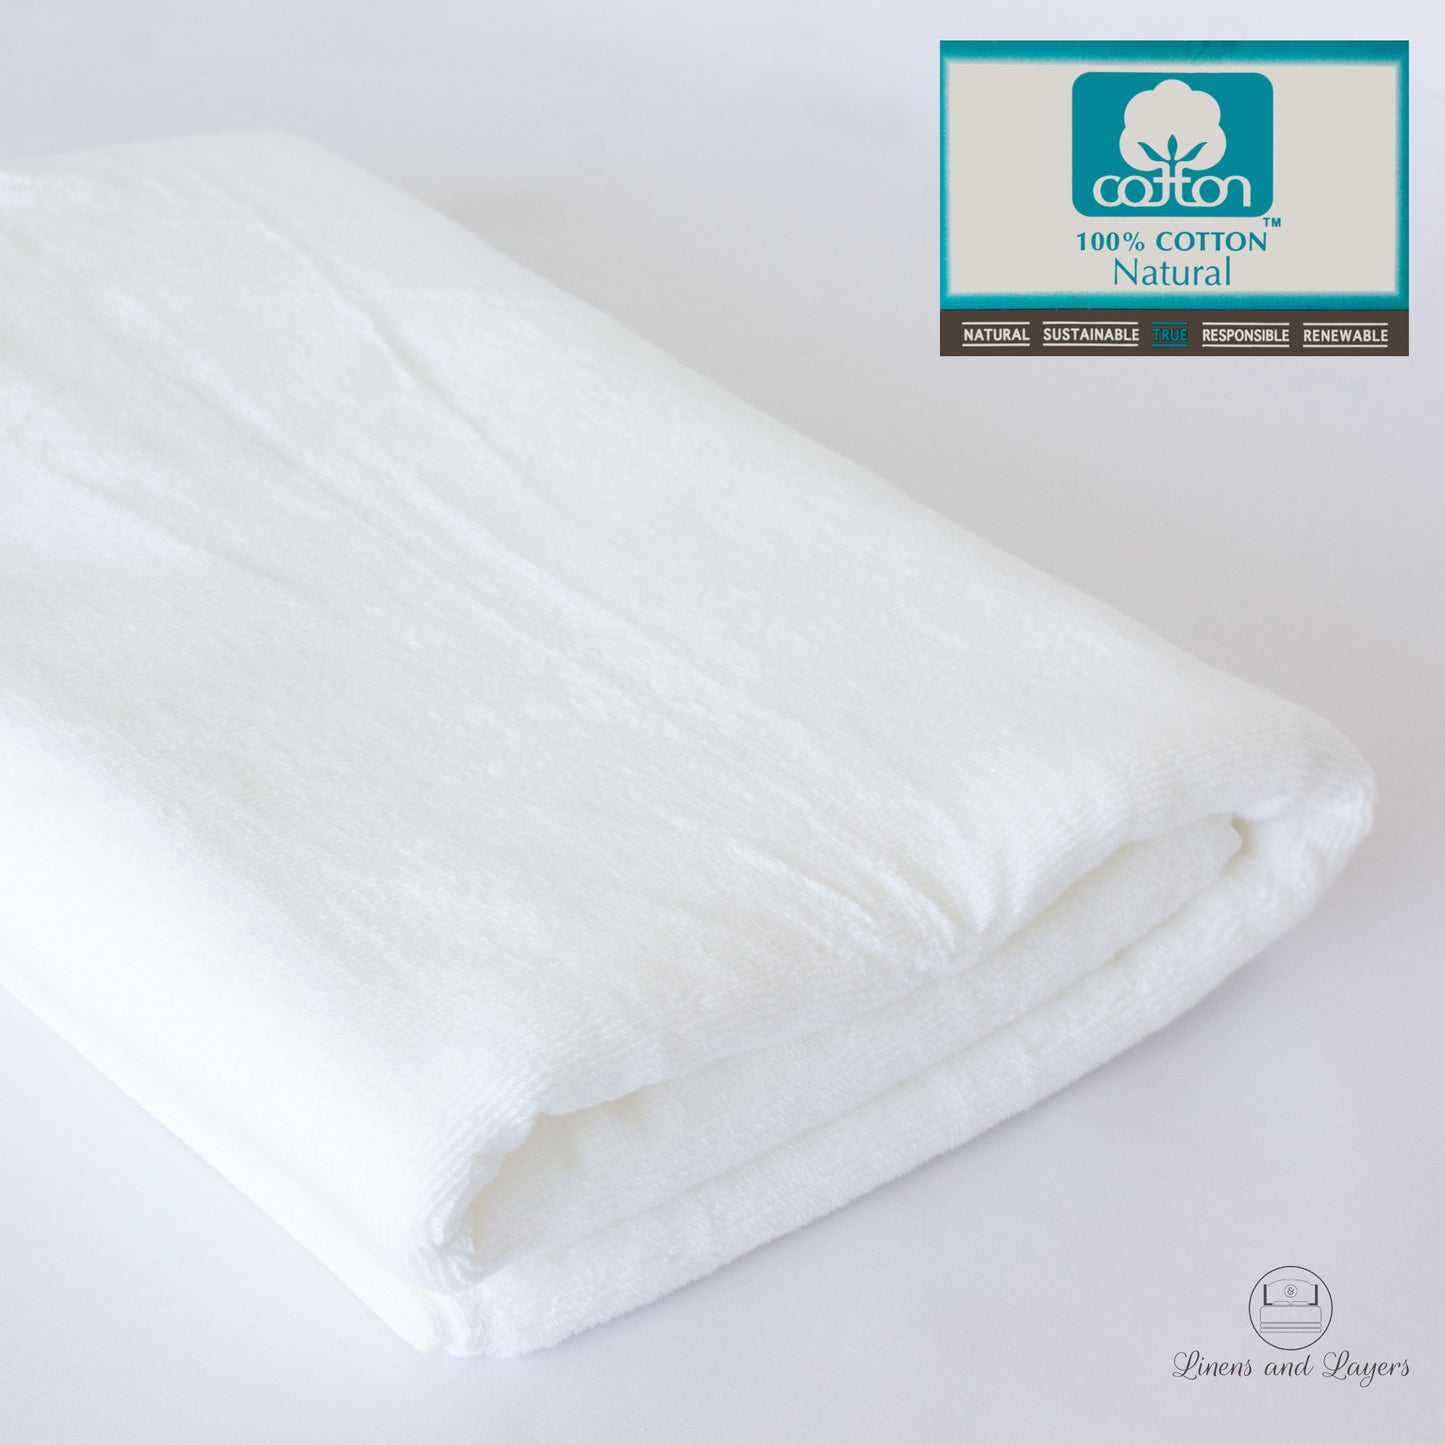 Hotel Quality White Bath Towel (553 GSM) - Pure Cotton Terrycloth - 27x55 inches